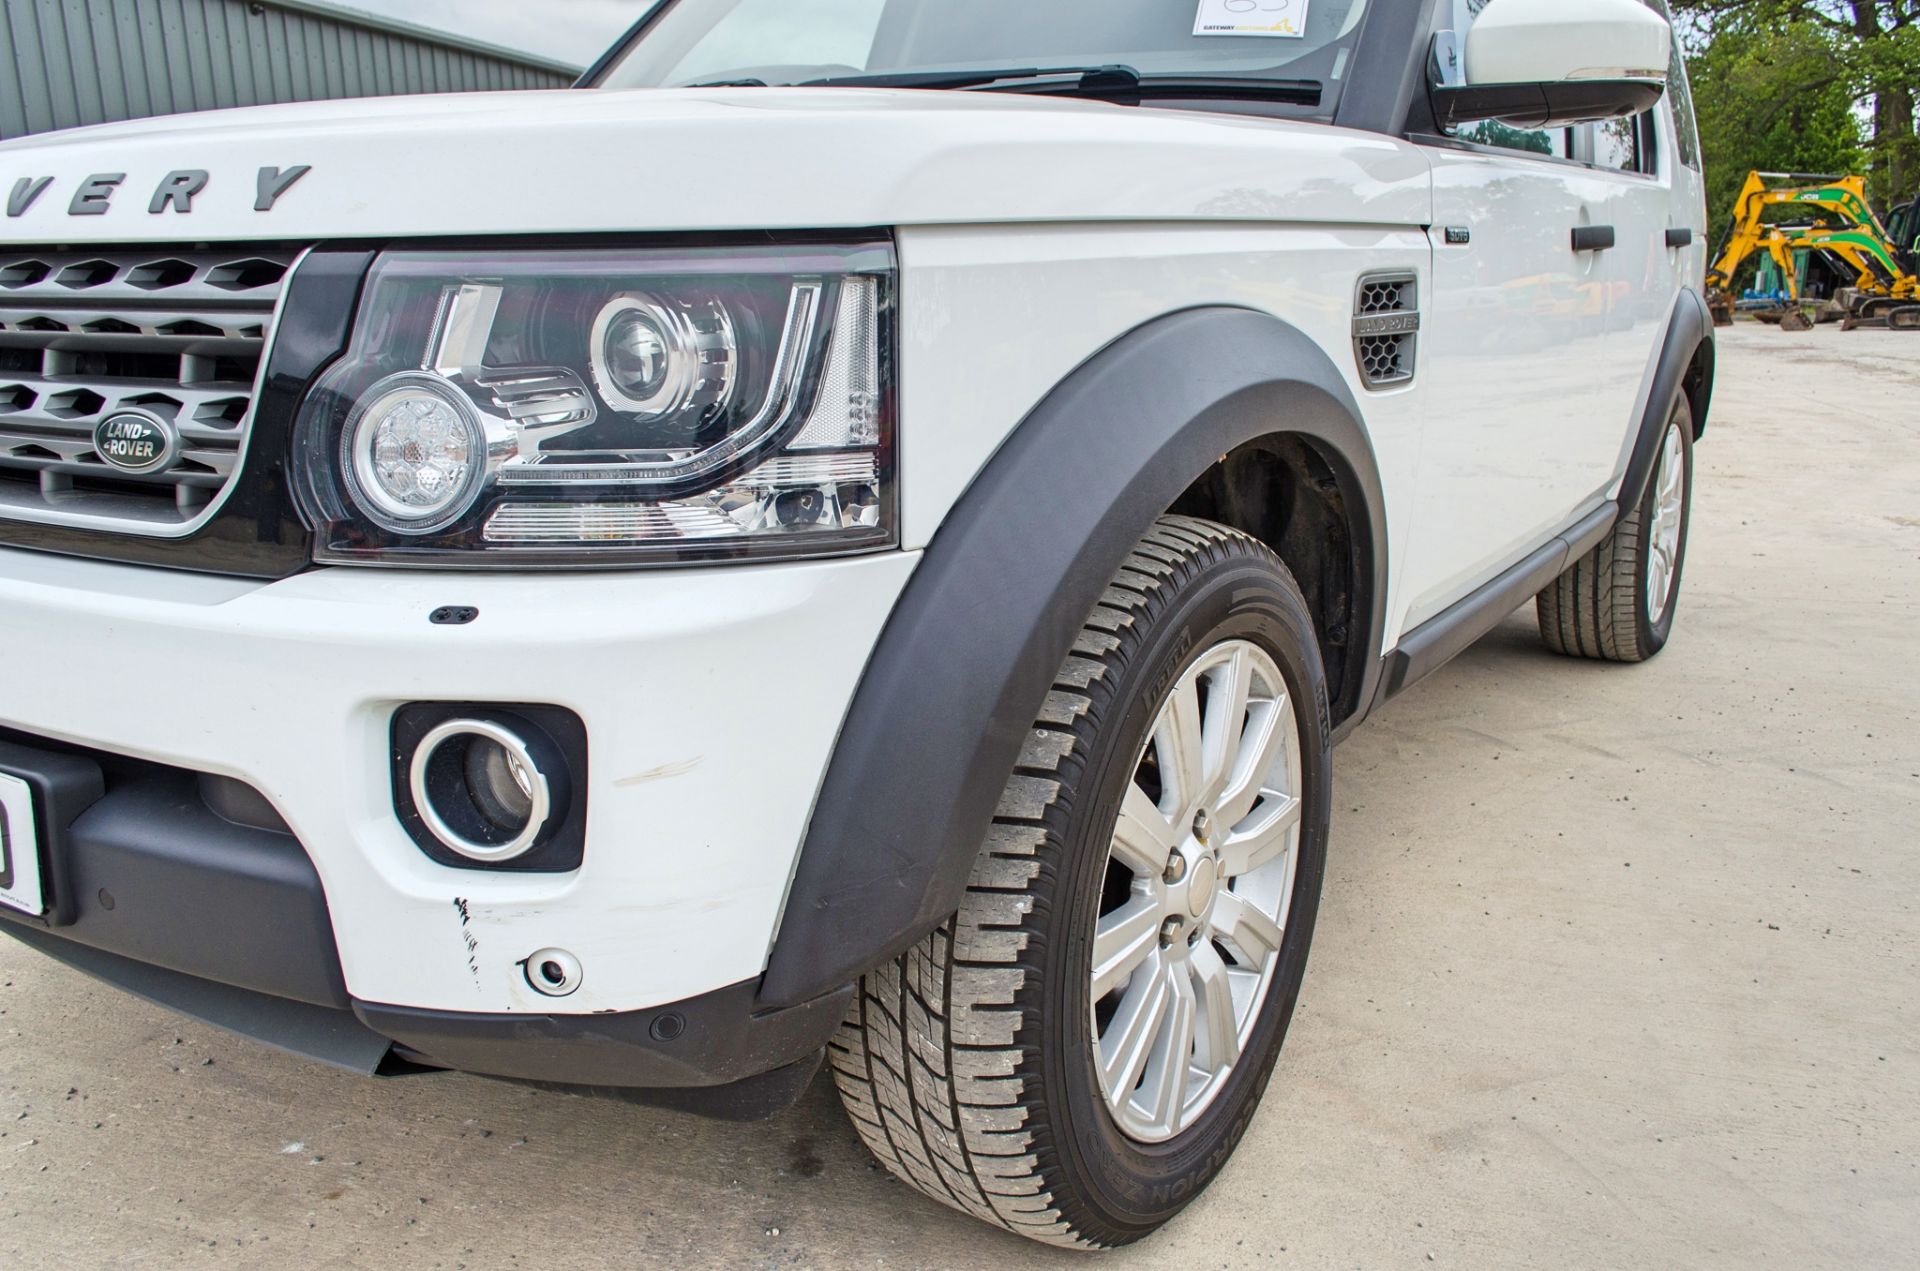 Land Rover Discovery 4 3.0 SDV6 255 XS Commercial 4x4 utility vehicle Registration Number: RV14 - Image 10 of 33